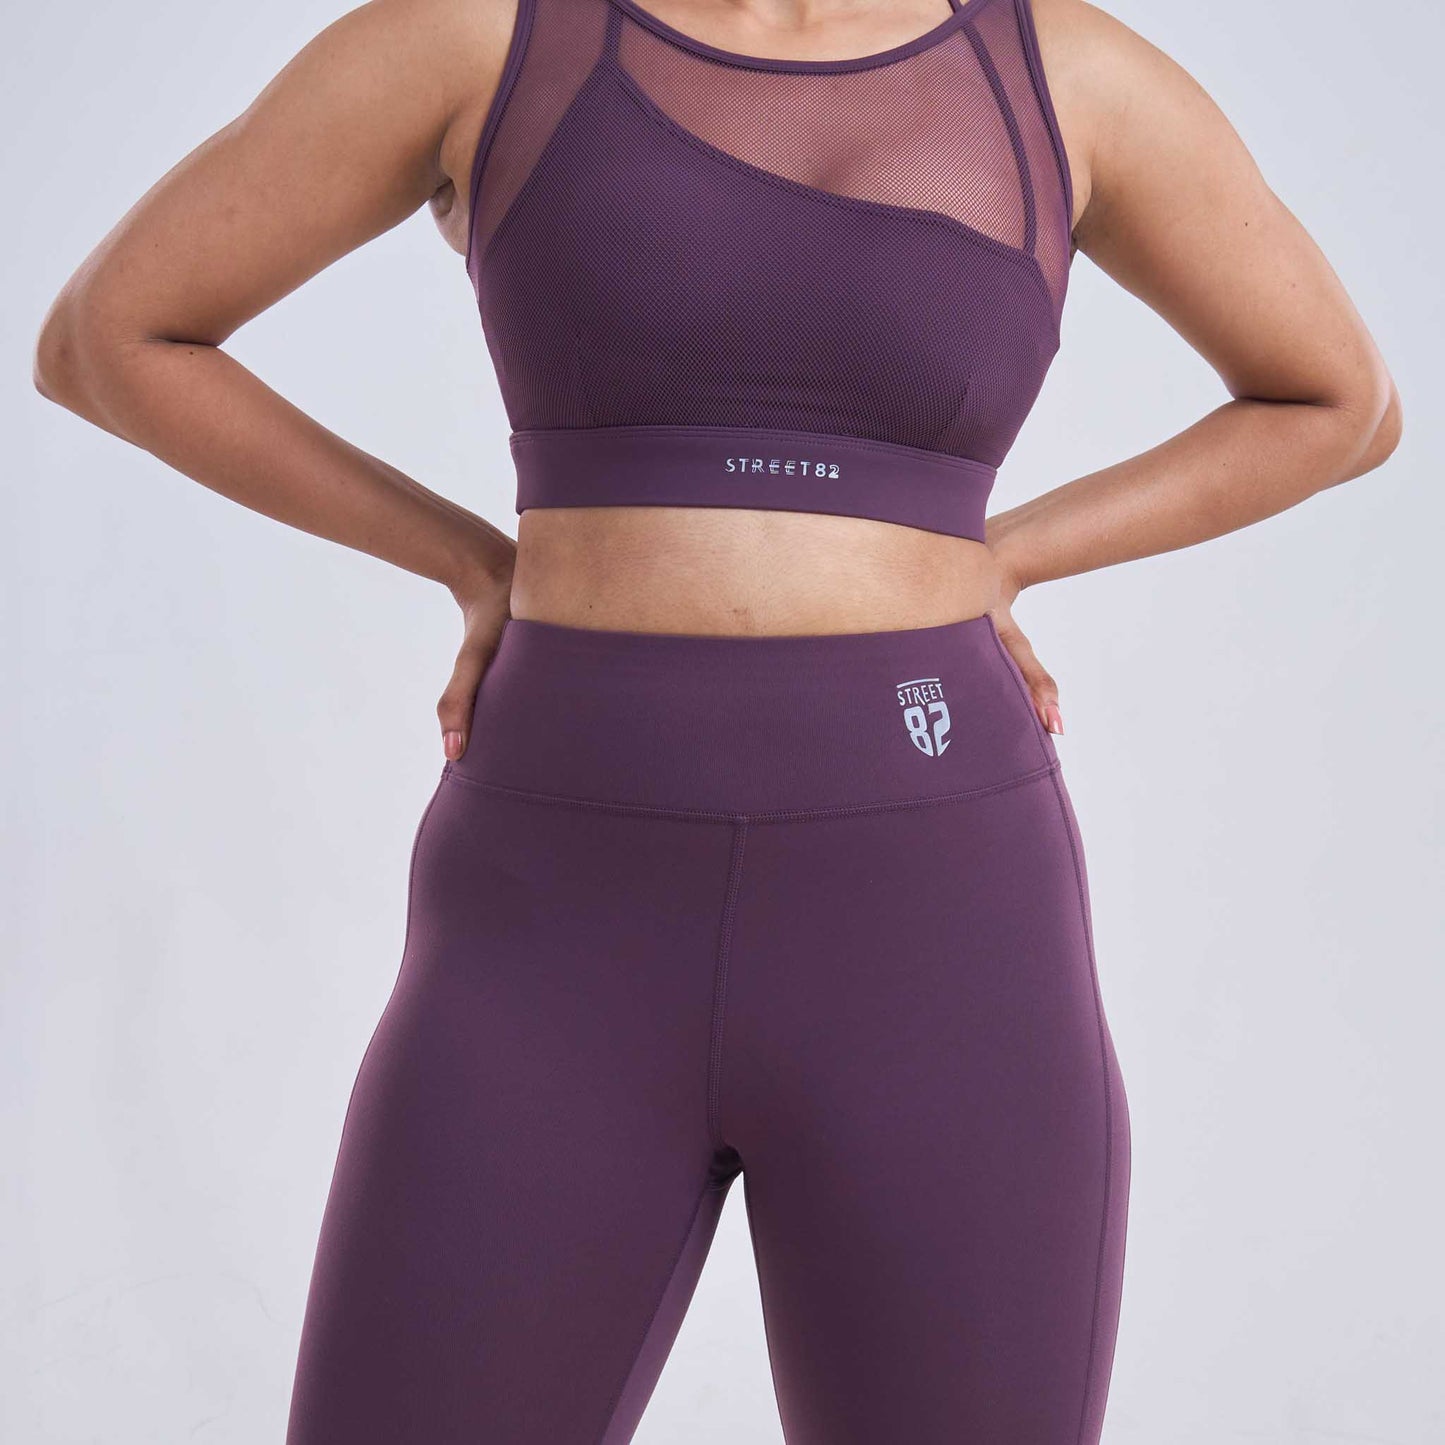 Ladies Yoga Sports Pant with Mesh style